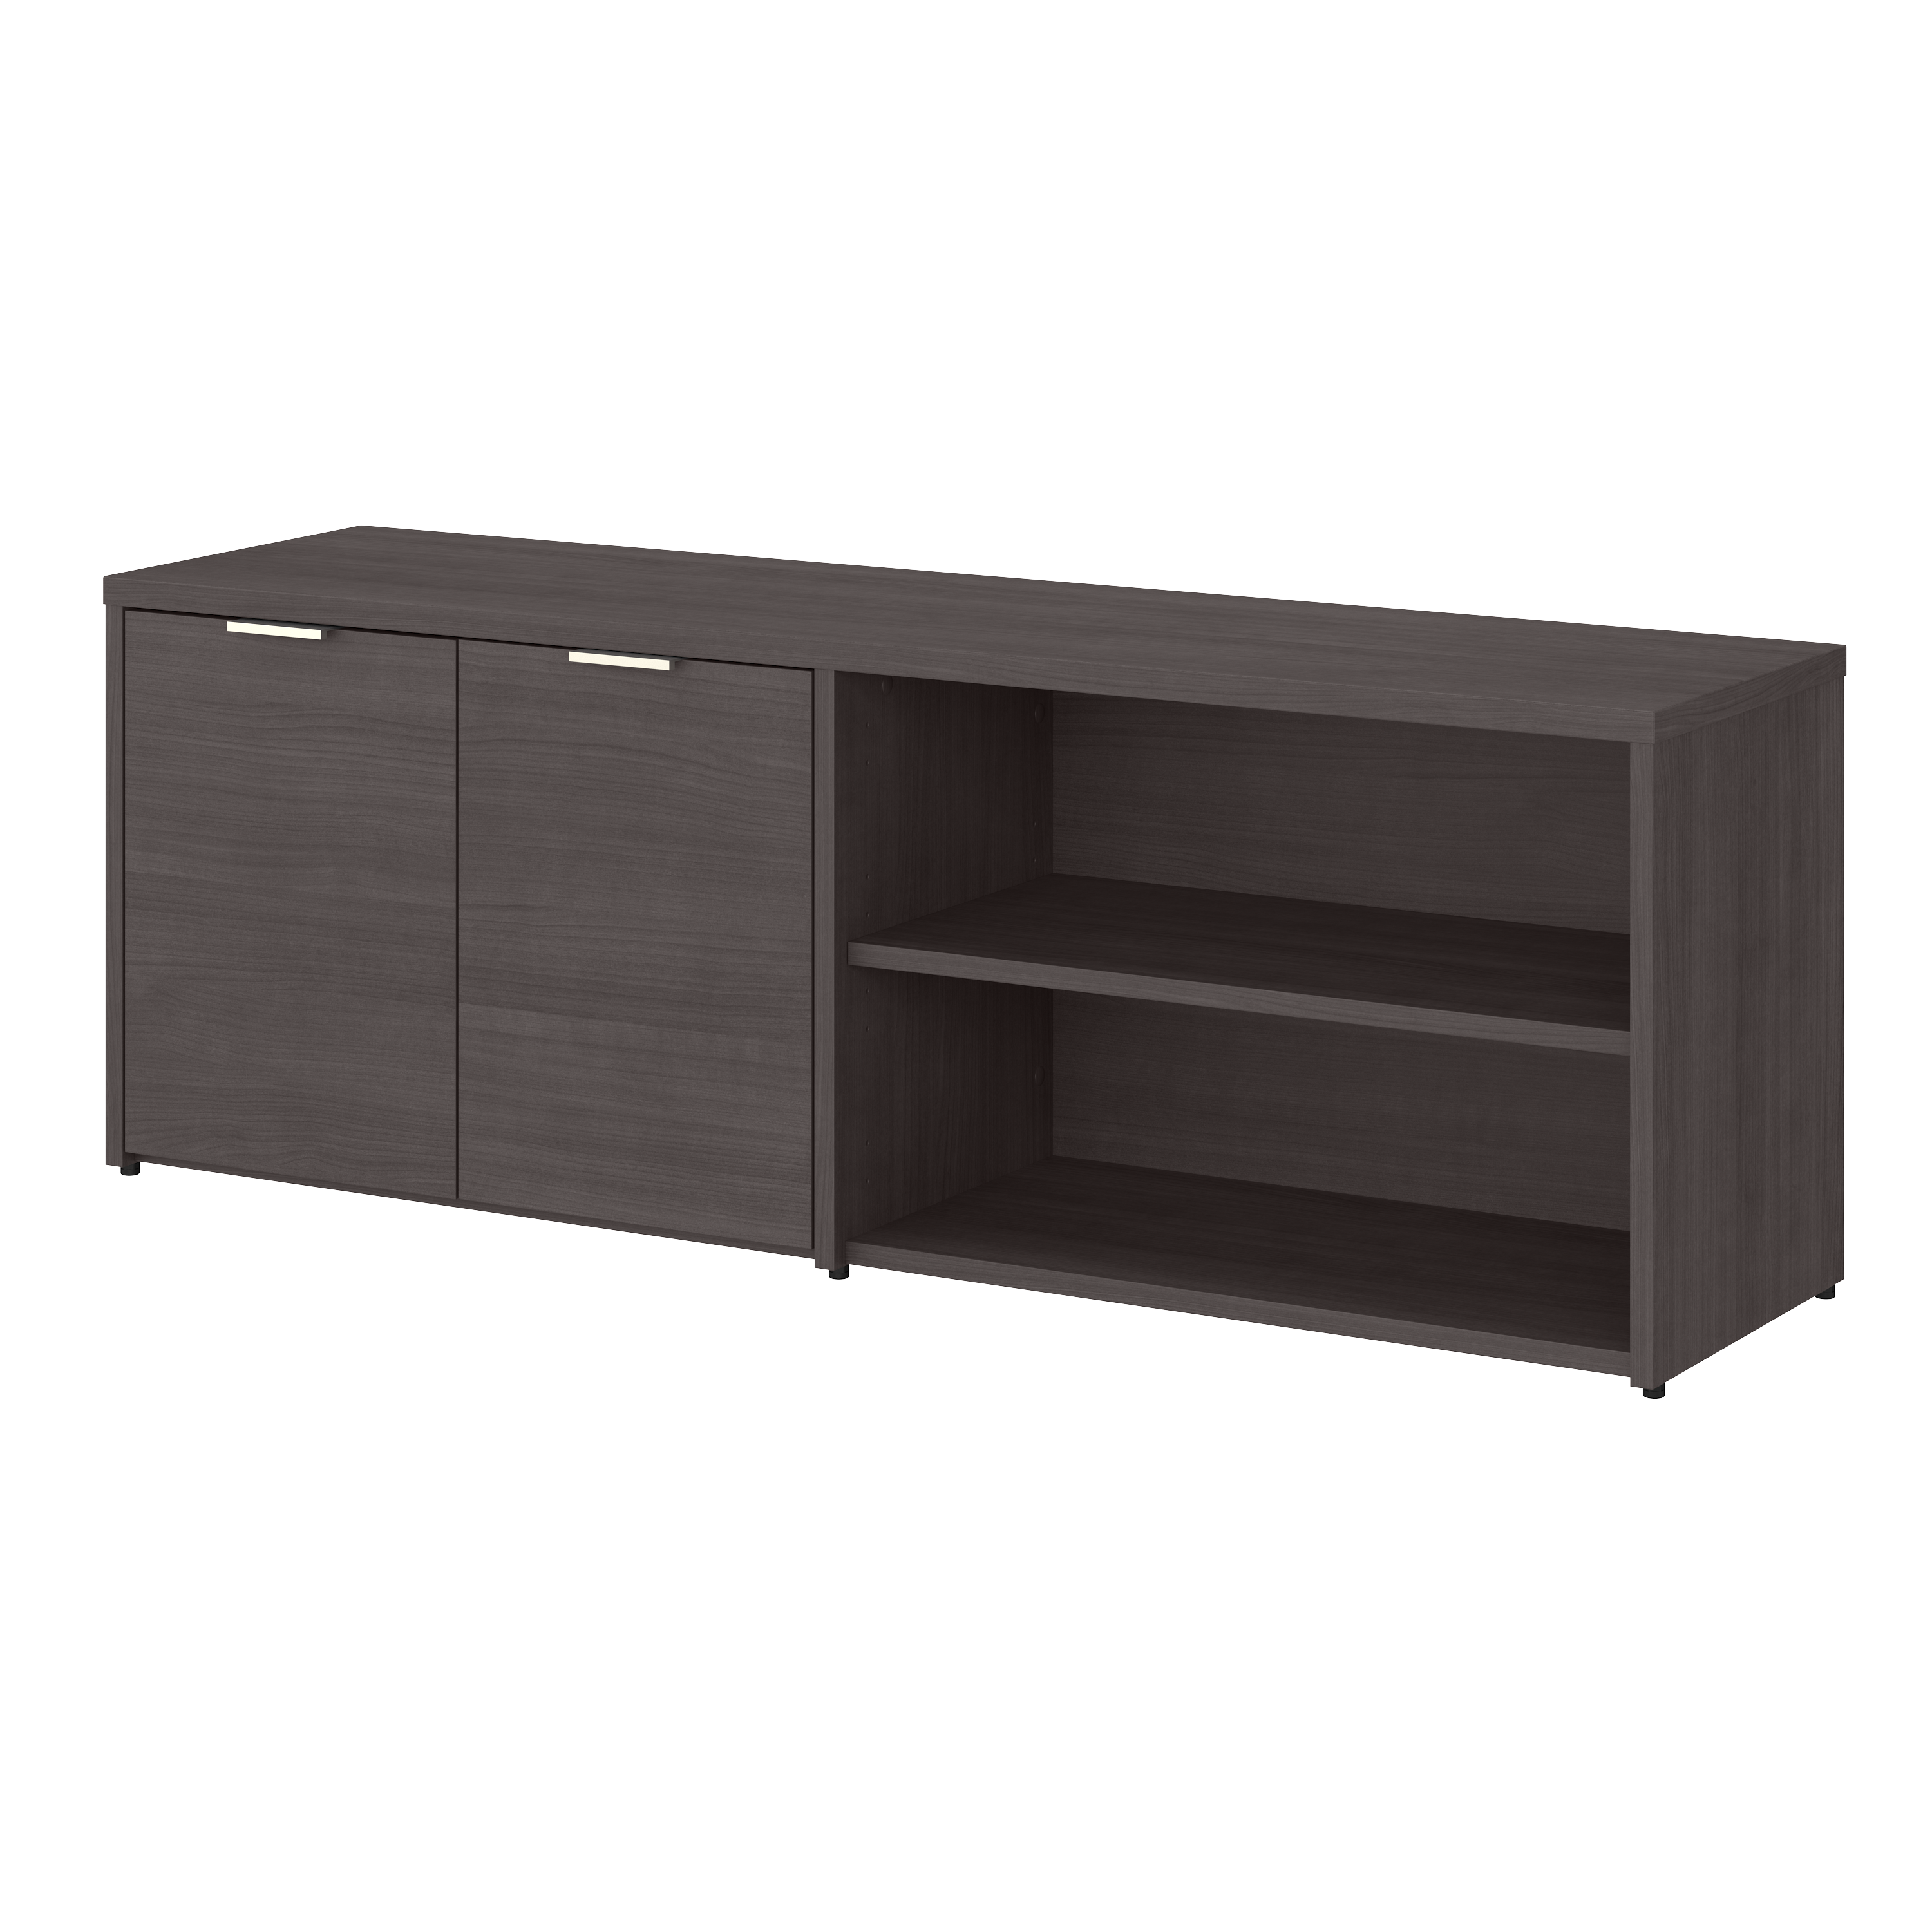 Shop Bush Business Furniture Jamestown Low Storage Cabinet with Doors and Shelves 02 JTS160SG #color_storm gray